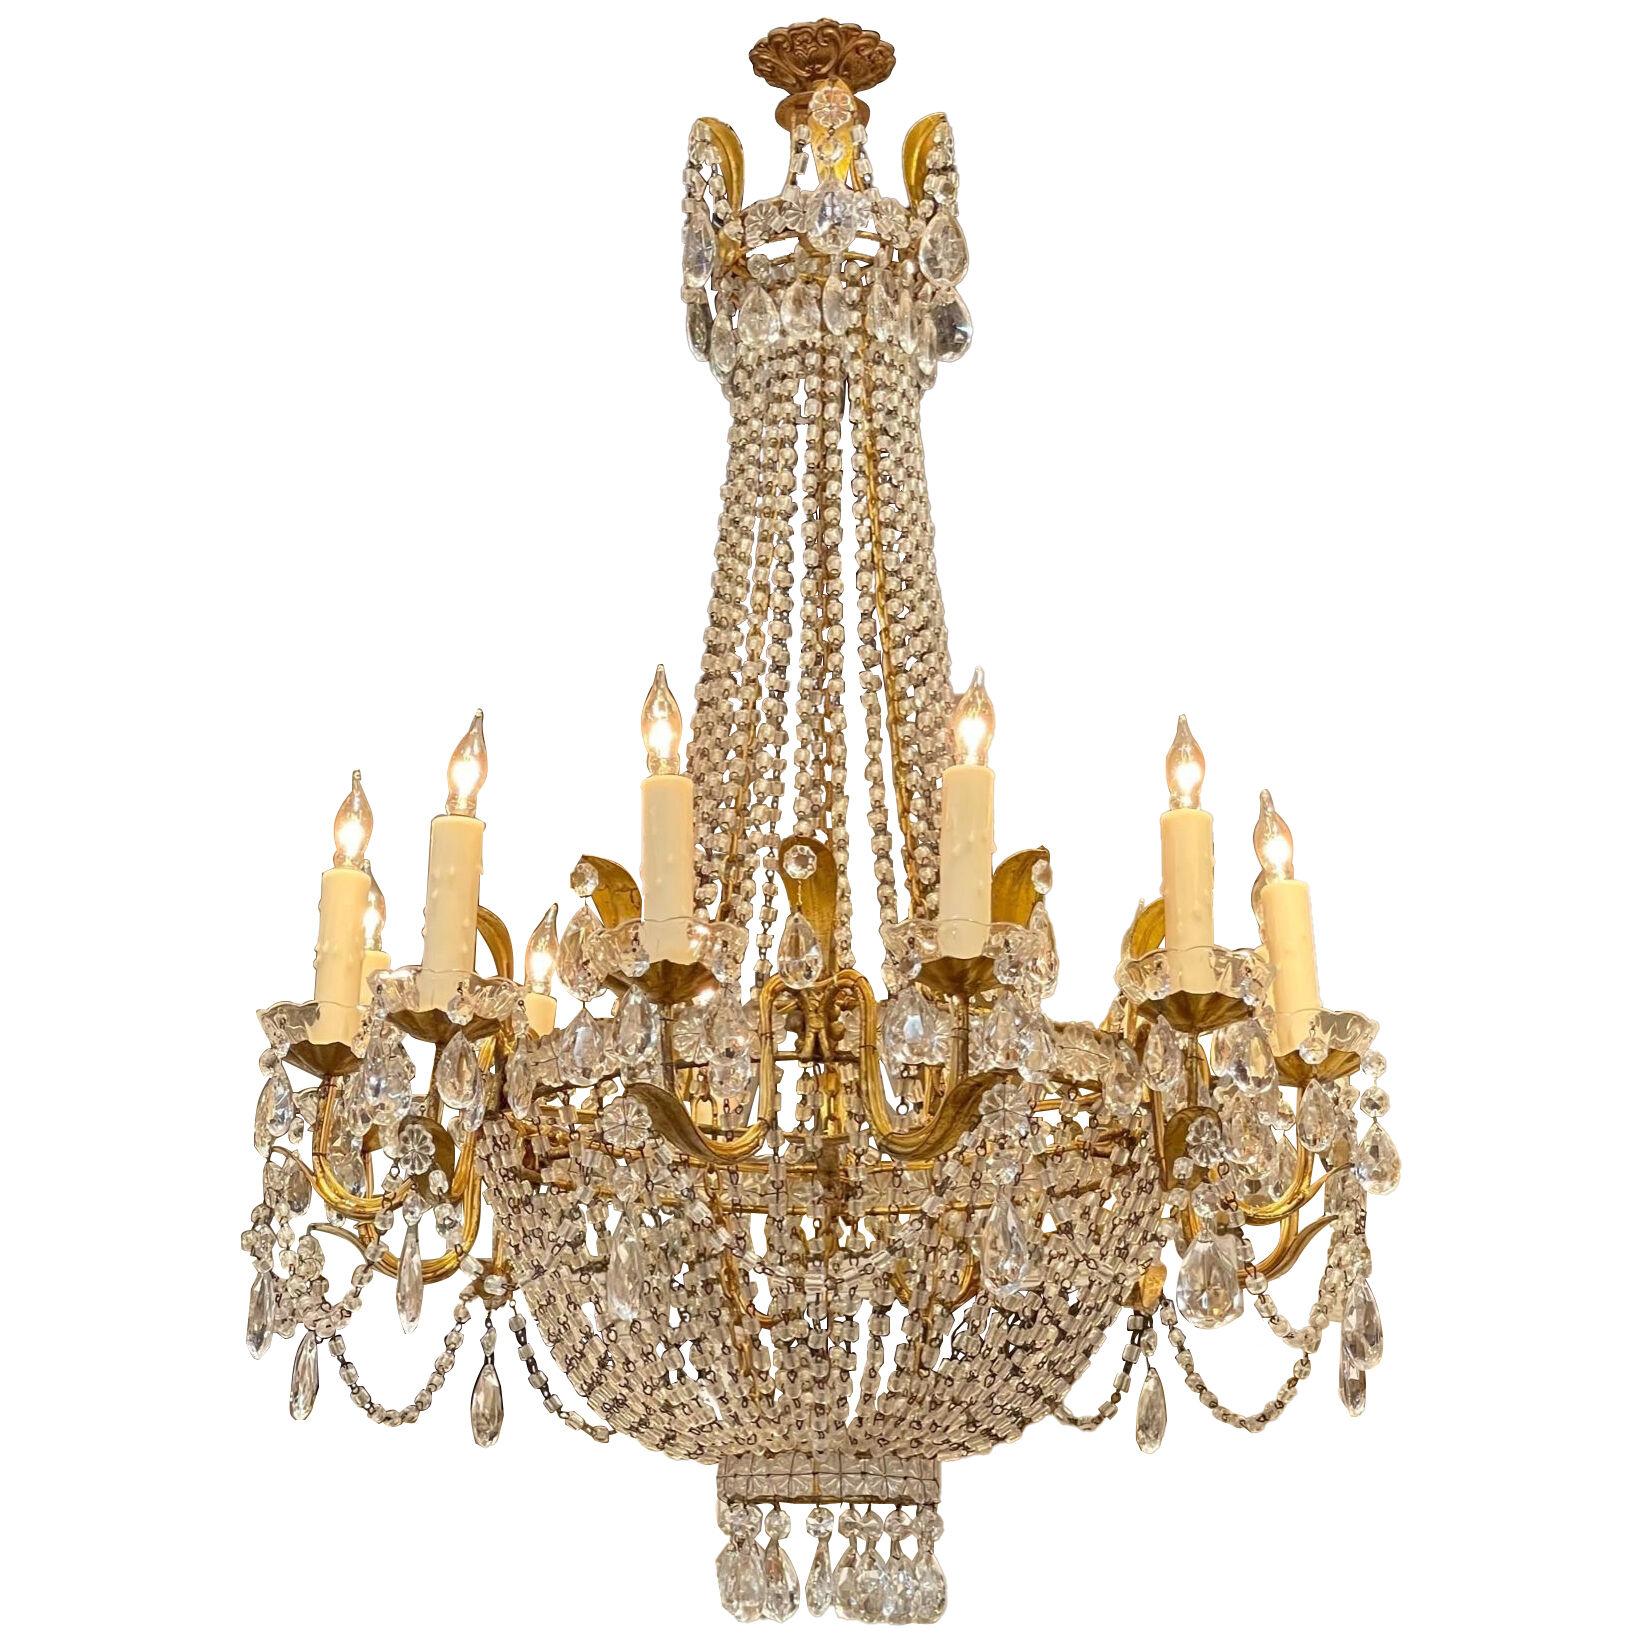 19th Century French Empire Style Gilt Metal and Crystal 12 Light Chandelier